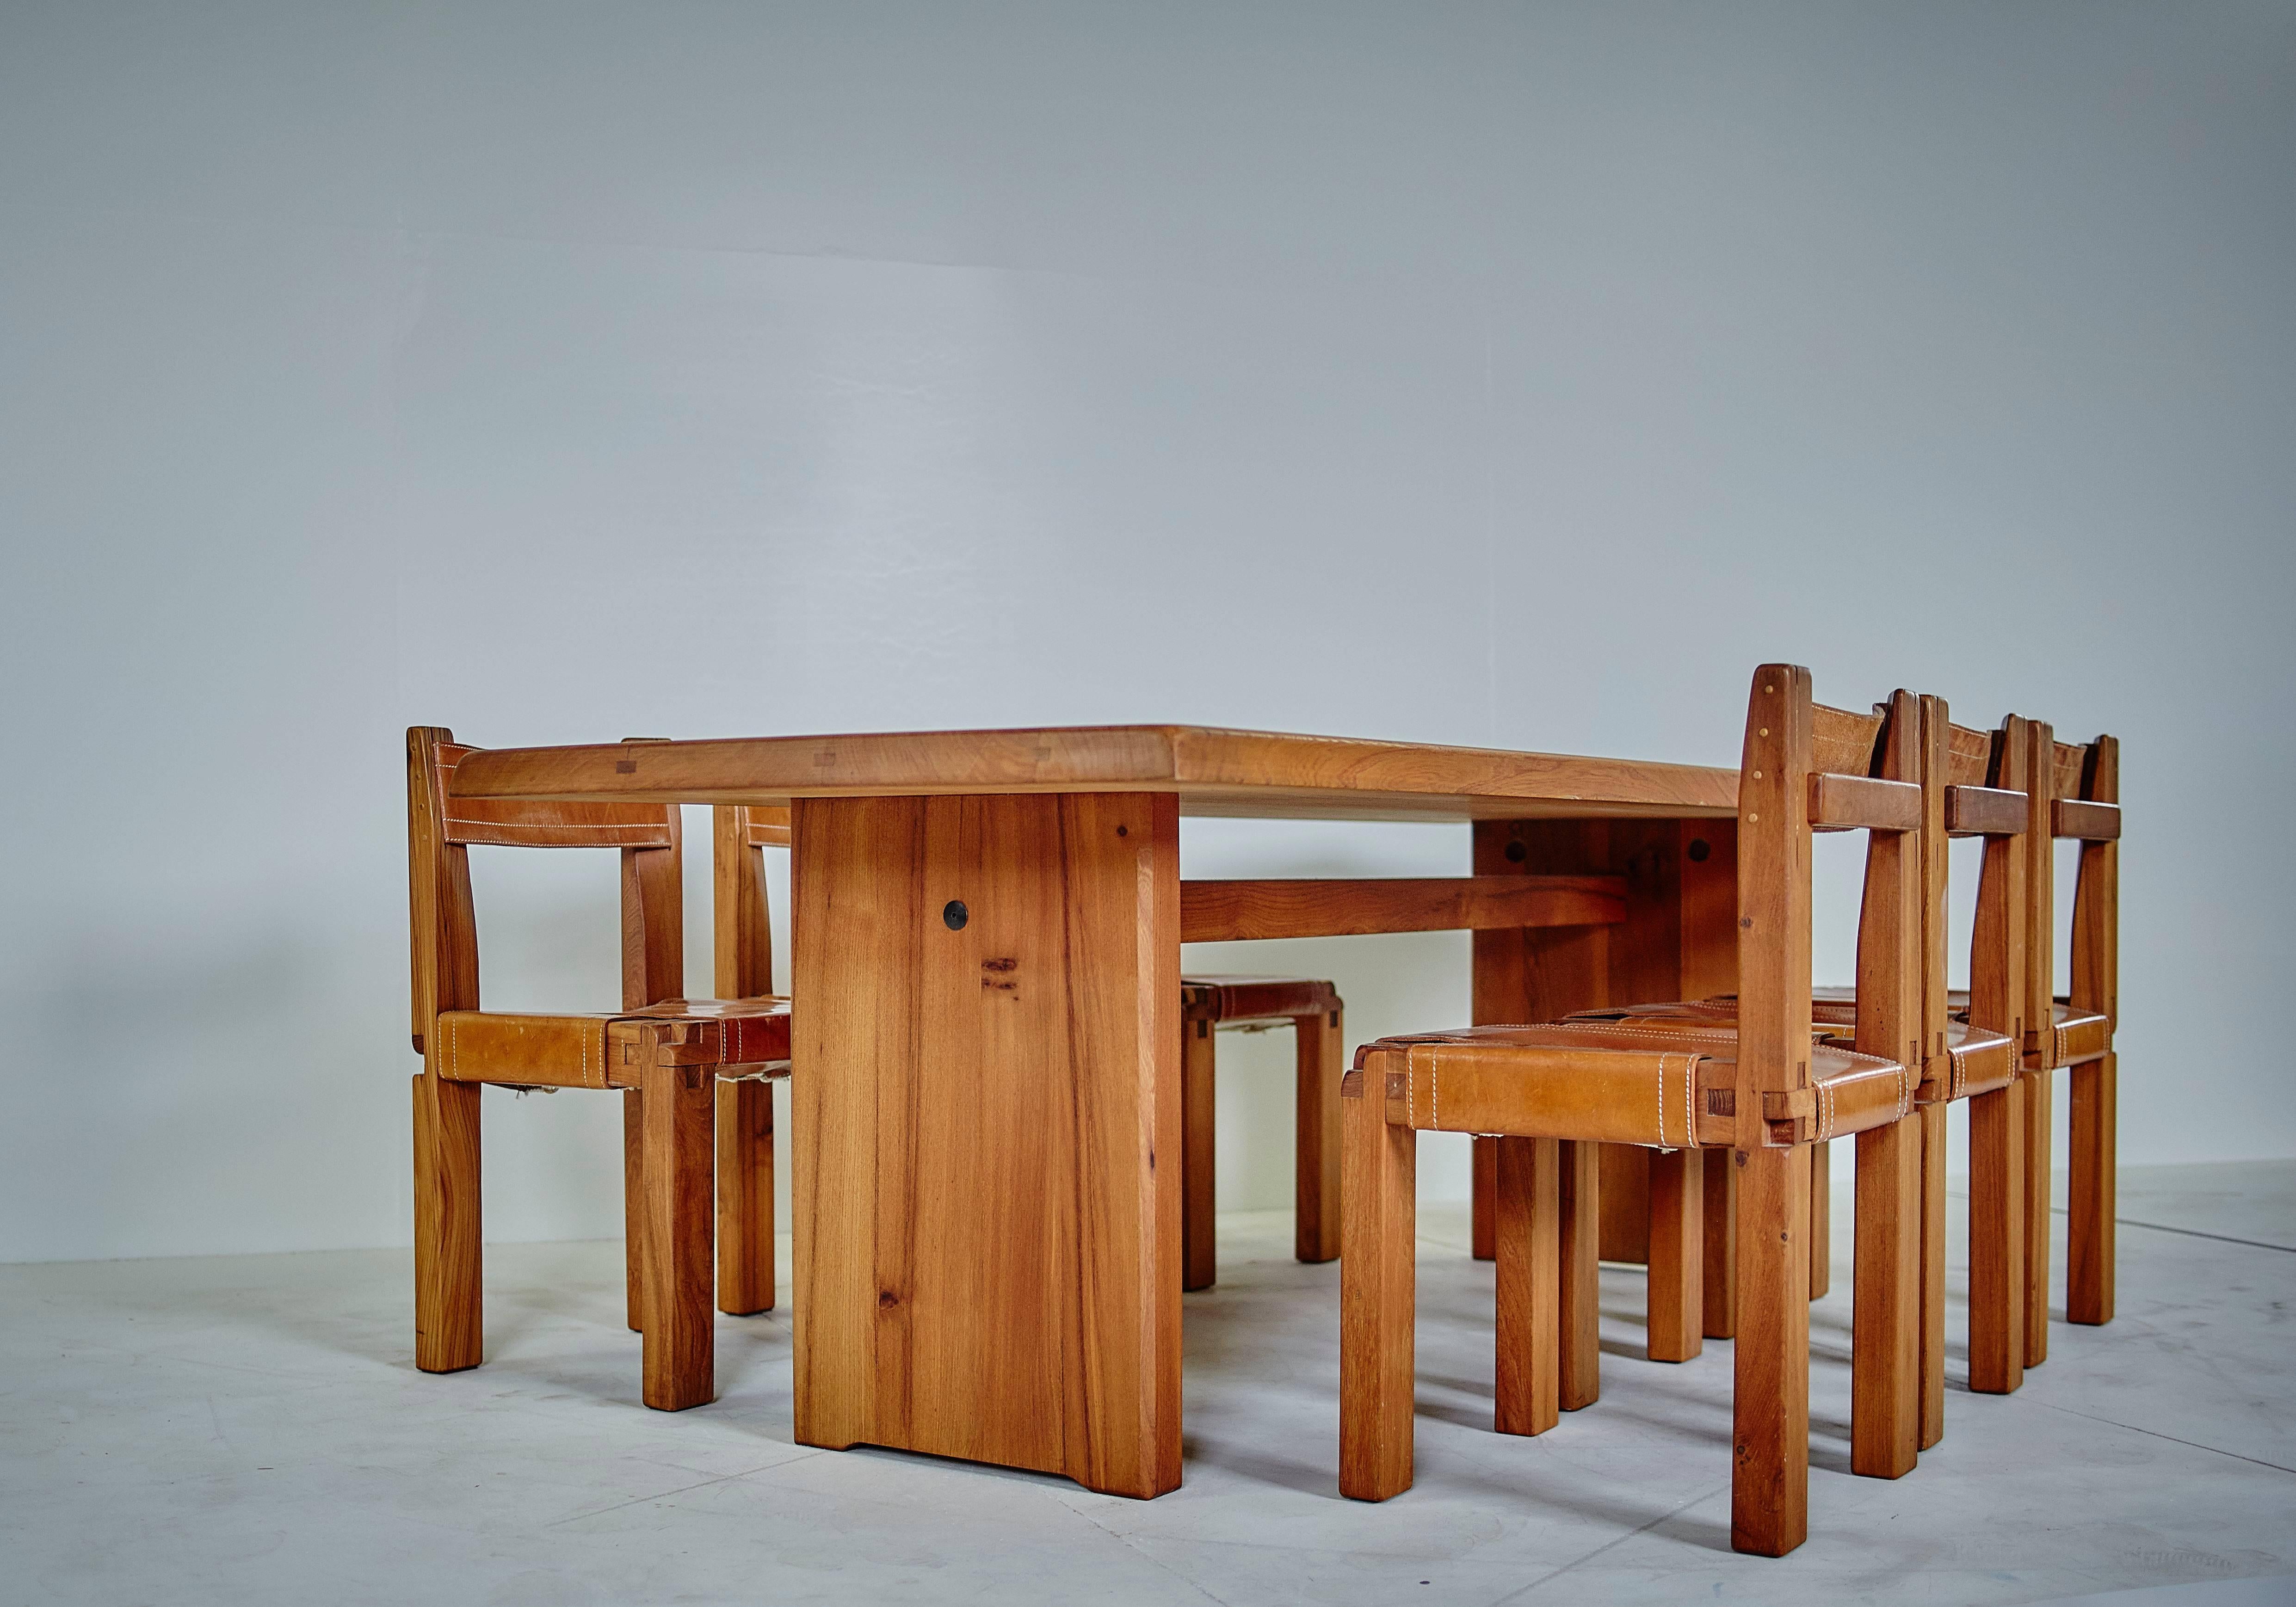 Set comprising a table mod. T14D solid rectangular tray supported by two solid legs joined by a high spacer and six chairs mod. S11, structures in solid elm and leather with cognac patina both for table and the chairs with apparent white saddle